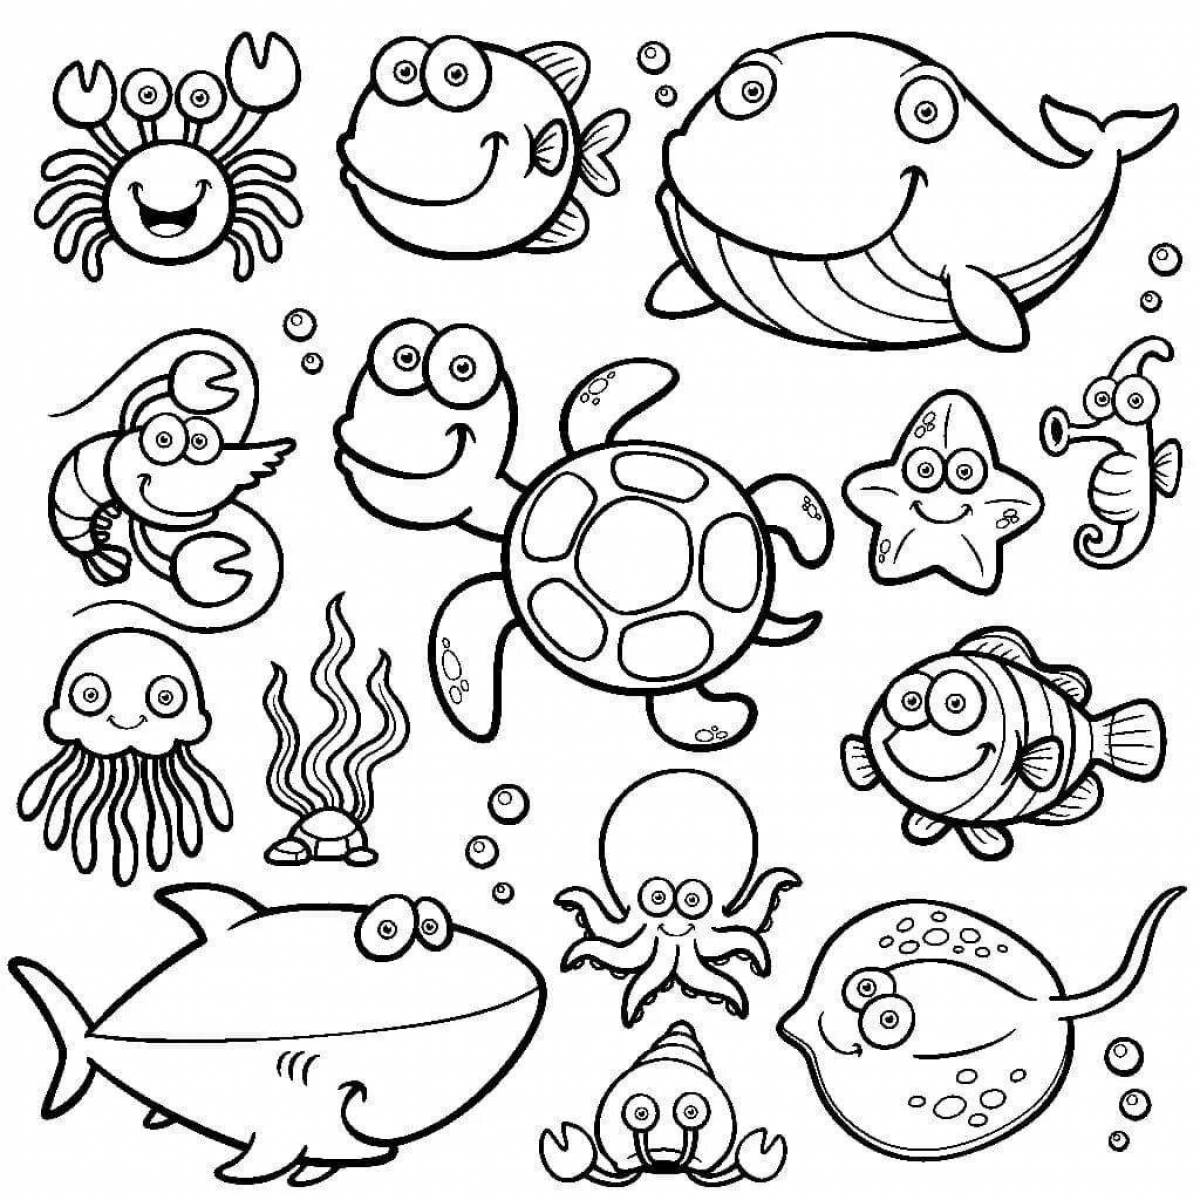 Amazing marine life coloring page for 5-6 year olds